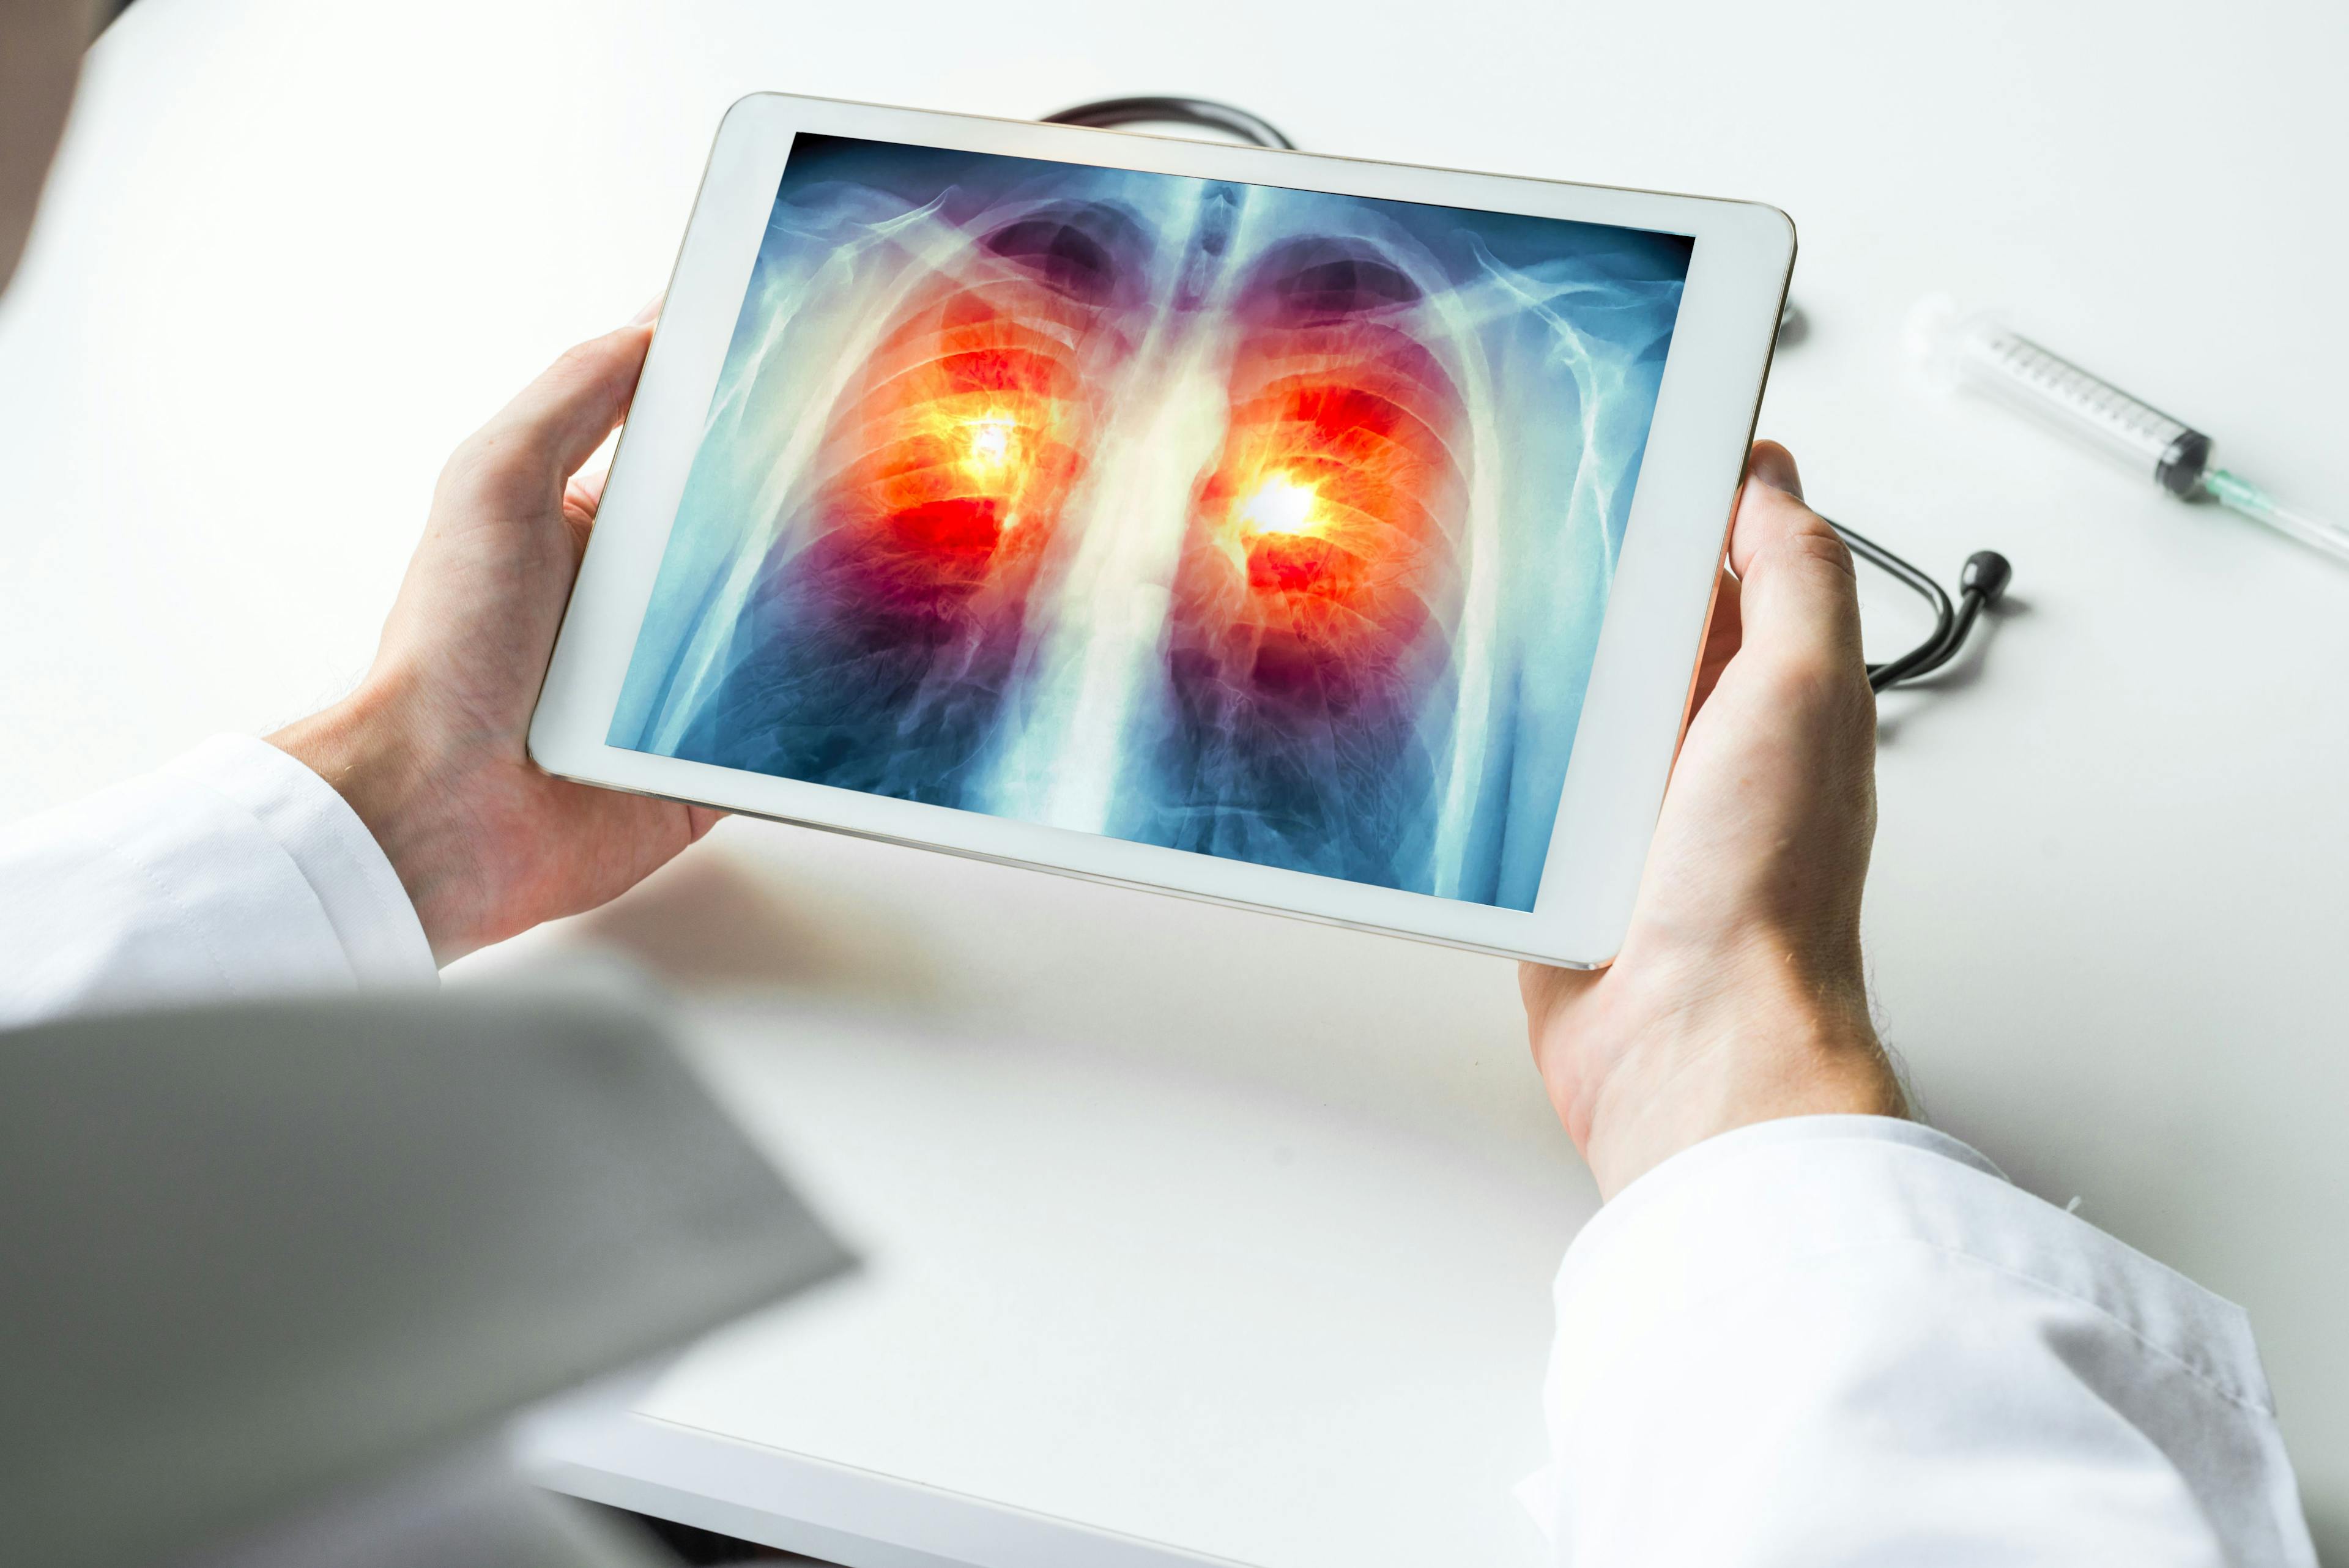 Doctor watching a xray of lung cancer on digital tablet. Radiology concept - Image credit: steph photographies | stock.adobe.com